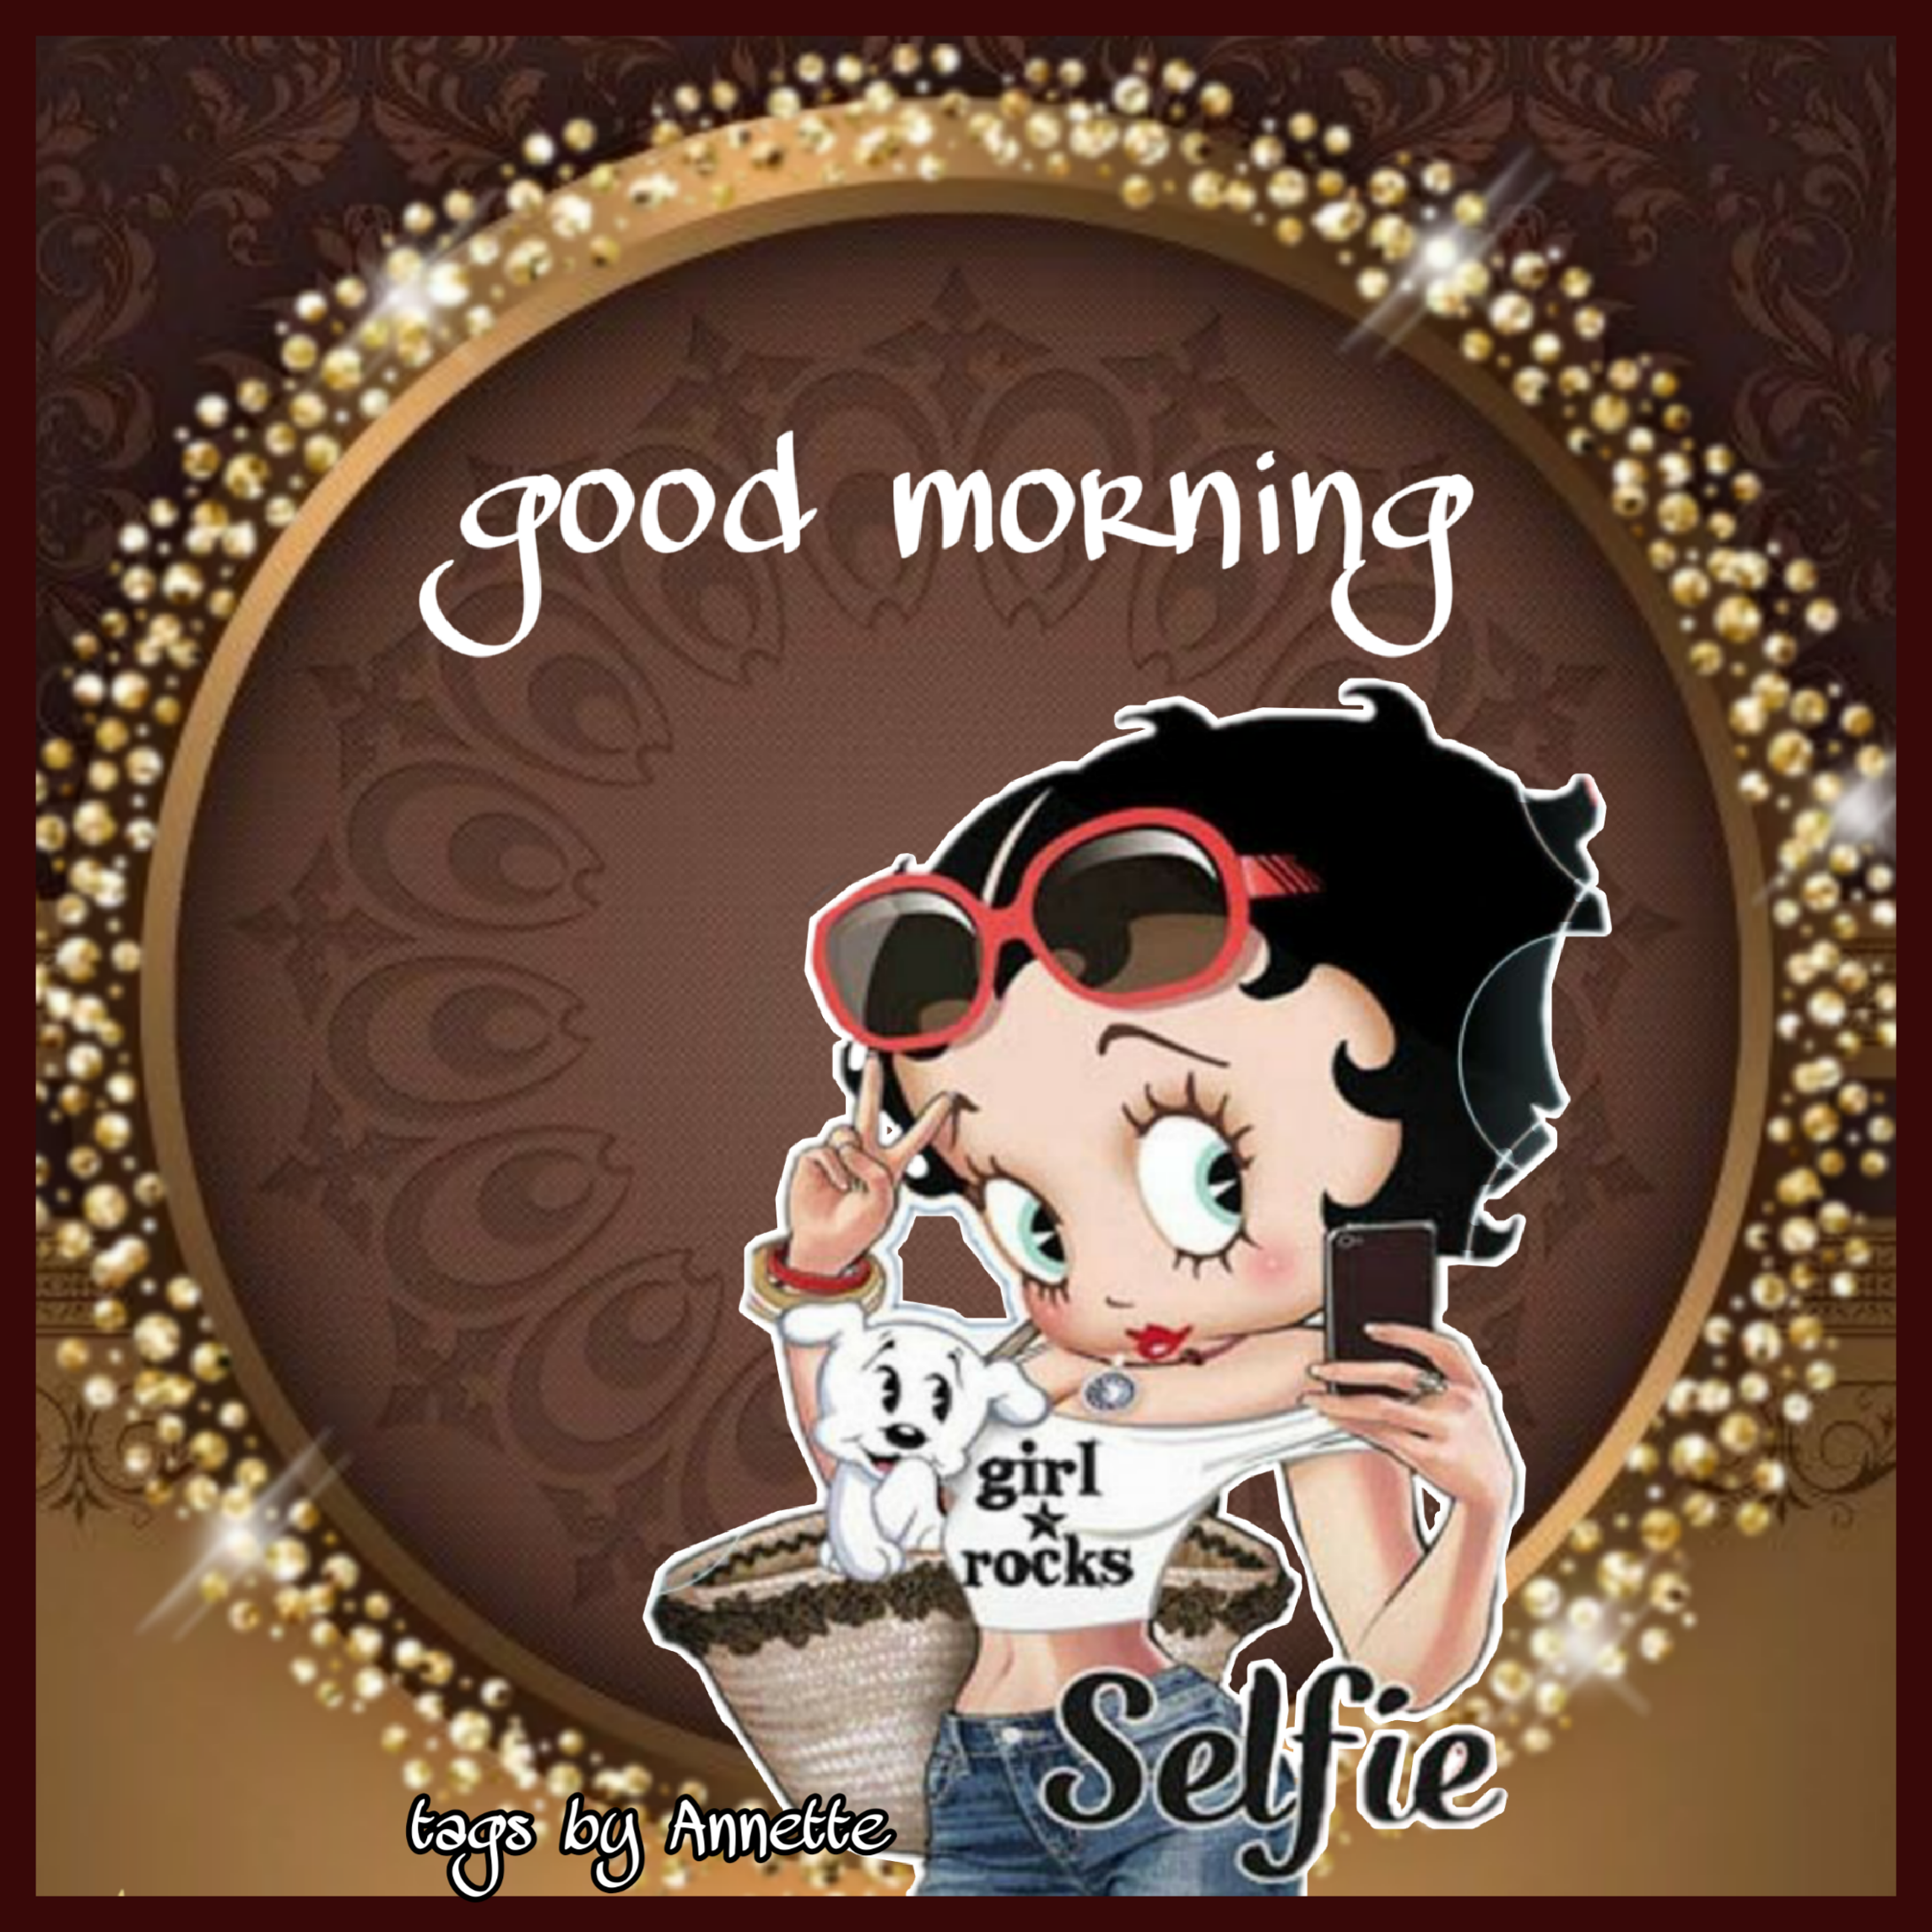 chris anain recommends betty boop good morning pictures pic